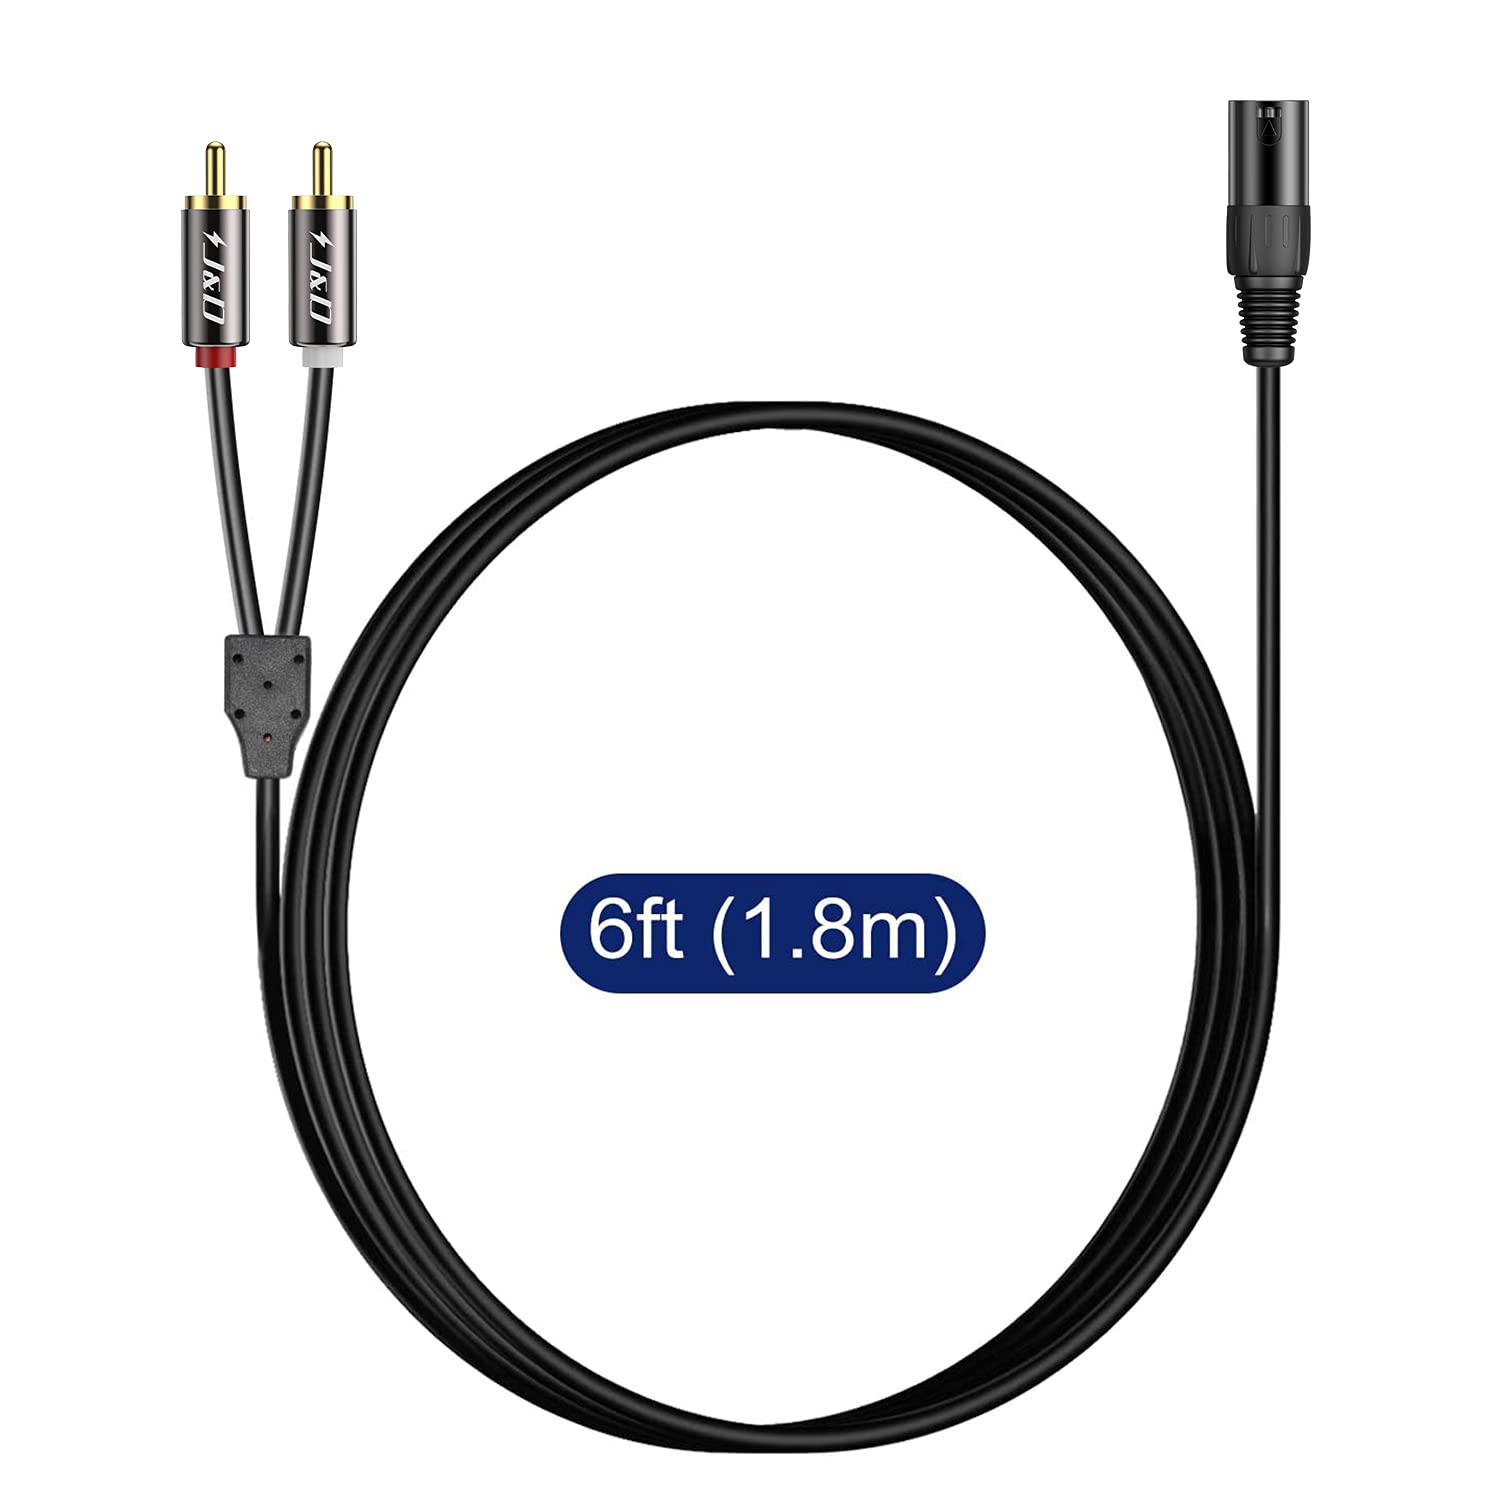 J&D XLR to 2 RCA Y Splitter Patch Cable, PVC Shelled Unbalanced Dual RCA Male to XLR Male Stereo Audio Interconnect Cable Adapter for Speaker